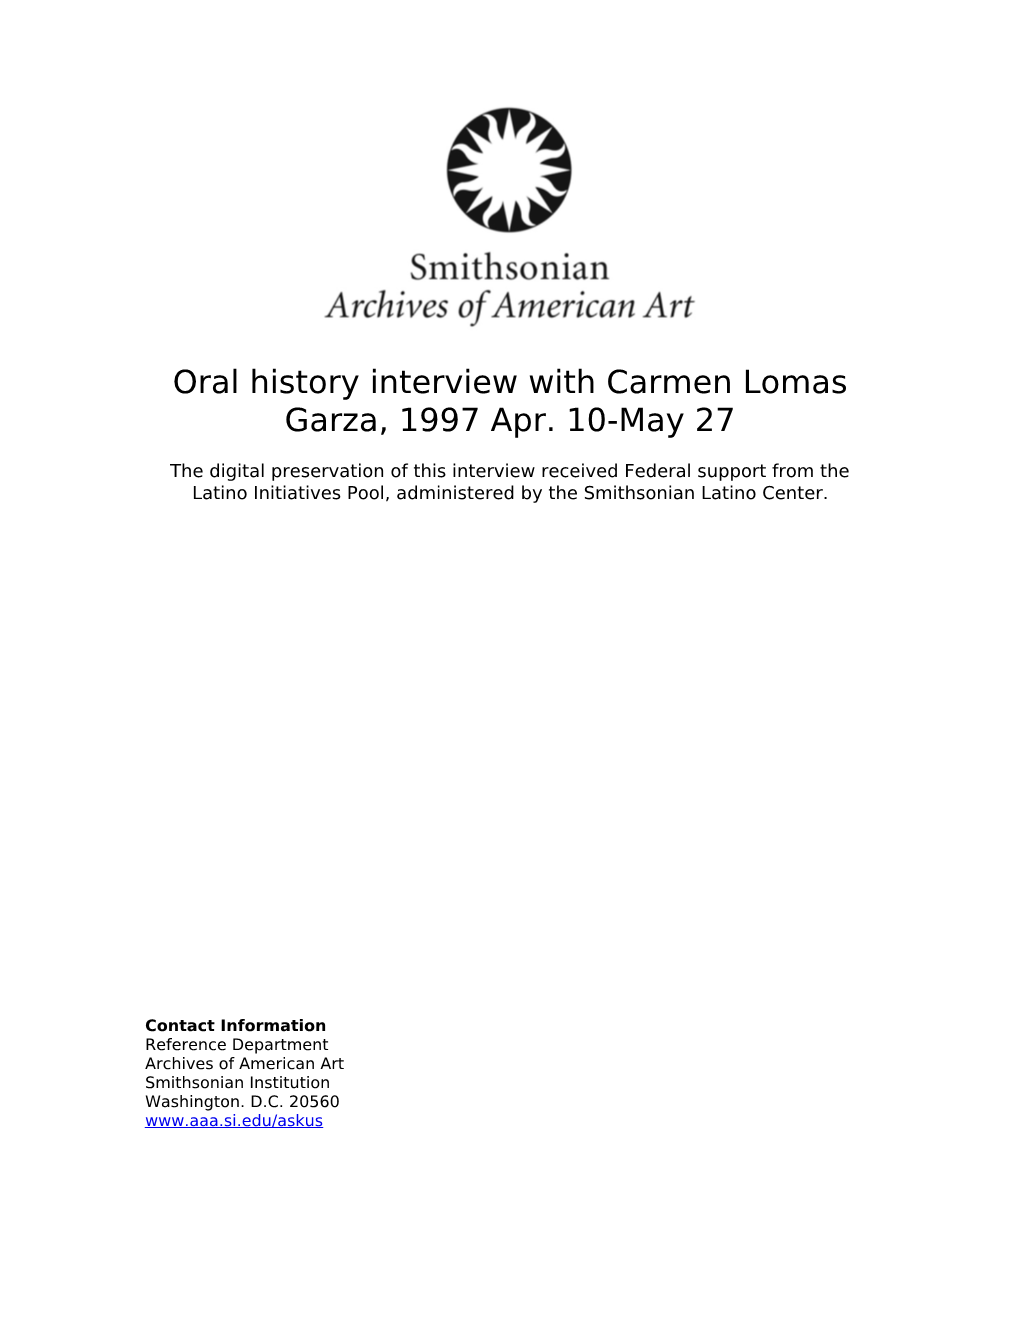 Oral History Interview with Carmen Lomas Garza, 1997 Apr. 10-May 27